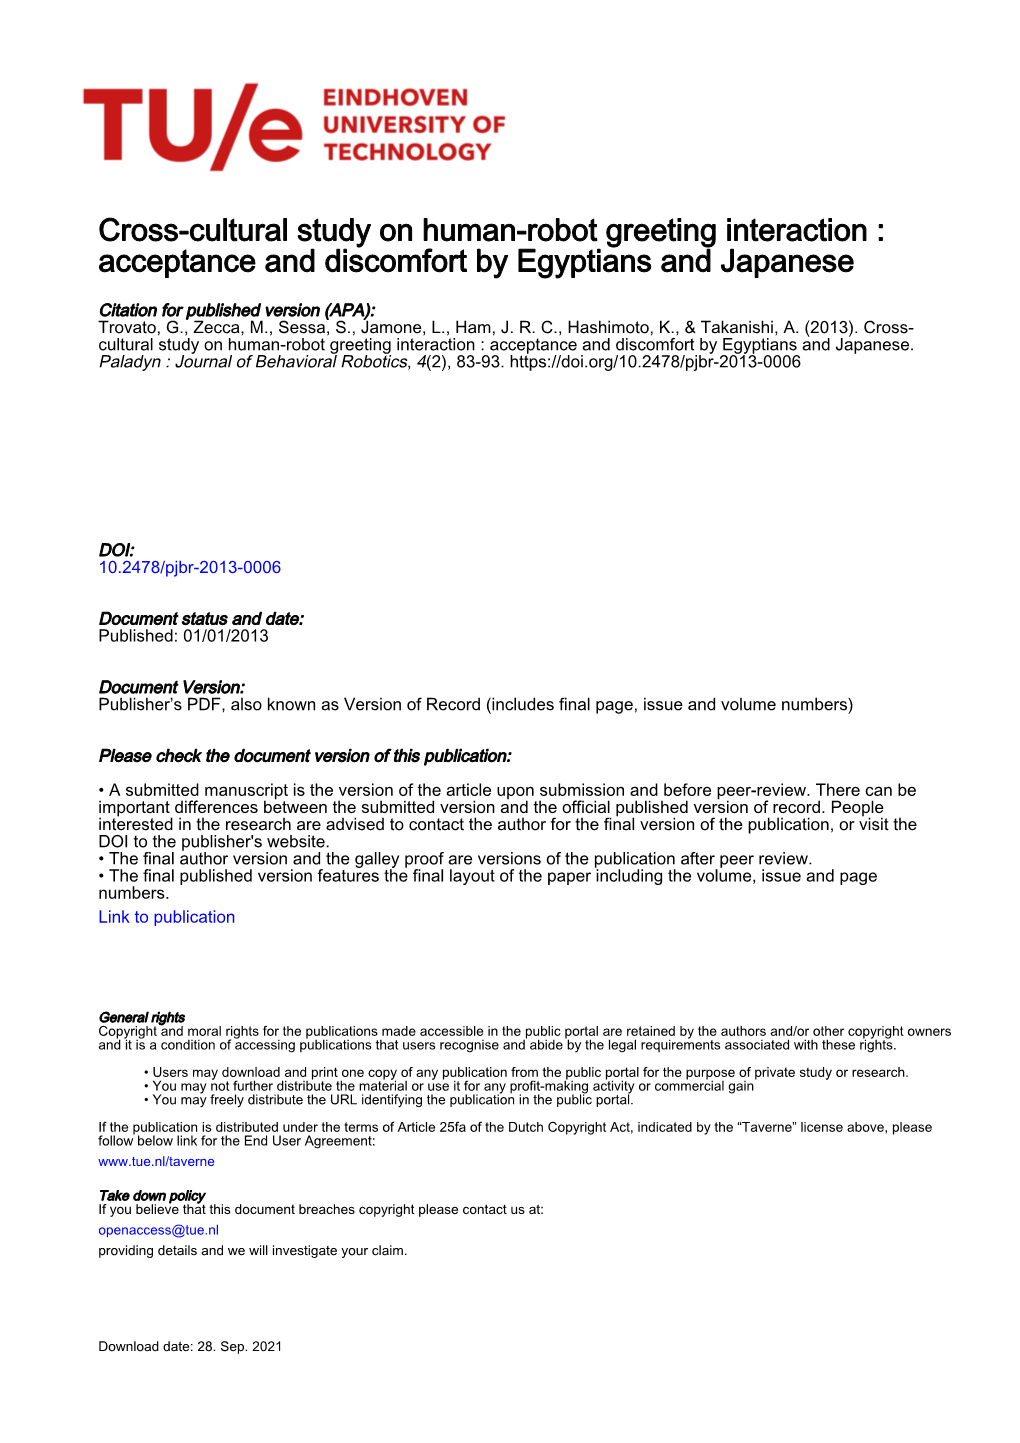 Cross-Cultural Study on Human-Robot Greeting Interaction : Acceptance and Discomfort by Egyptians and Japanese